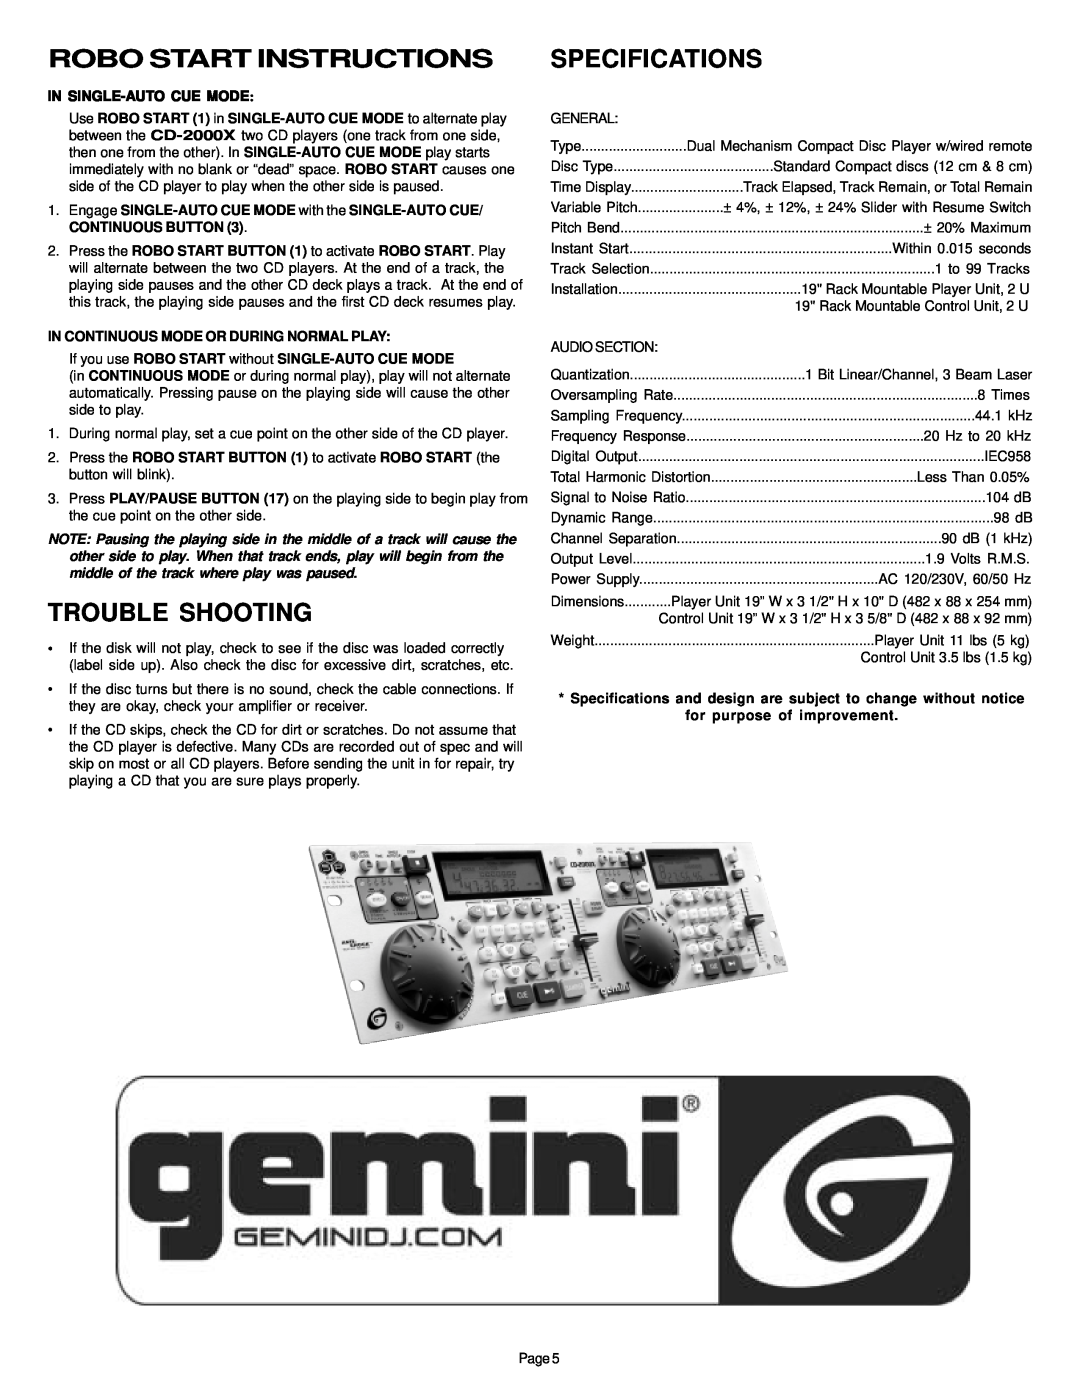 Gemini CD-2000X manual Robo Start Instructions, Trouble Shooting, Specifications, In Single-Autocue Mode 